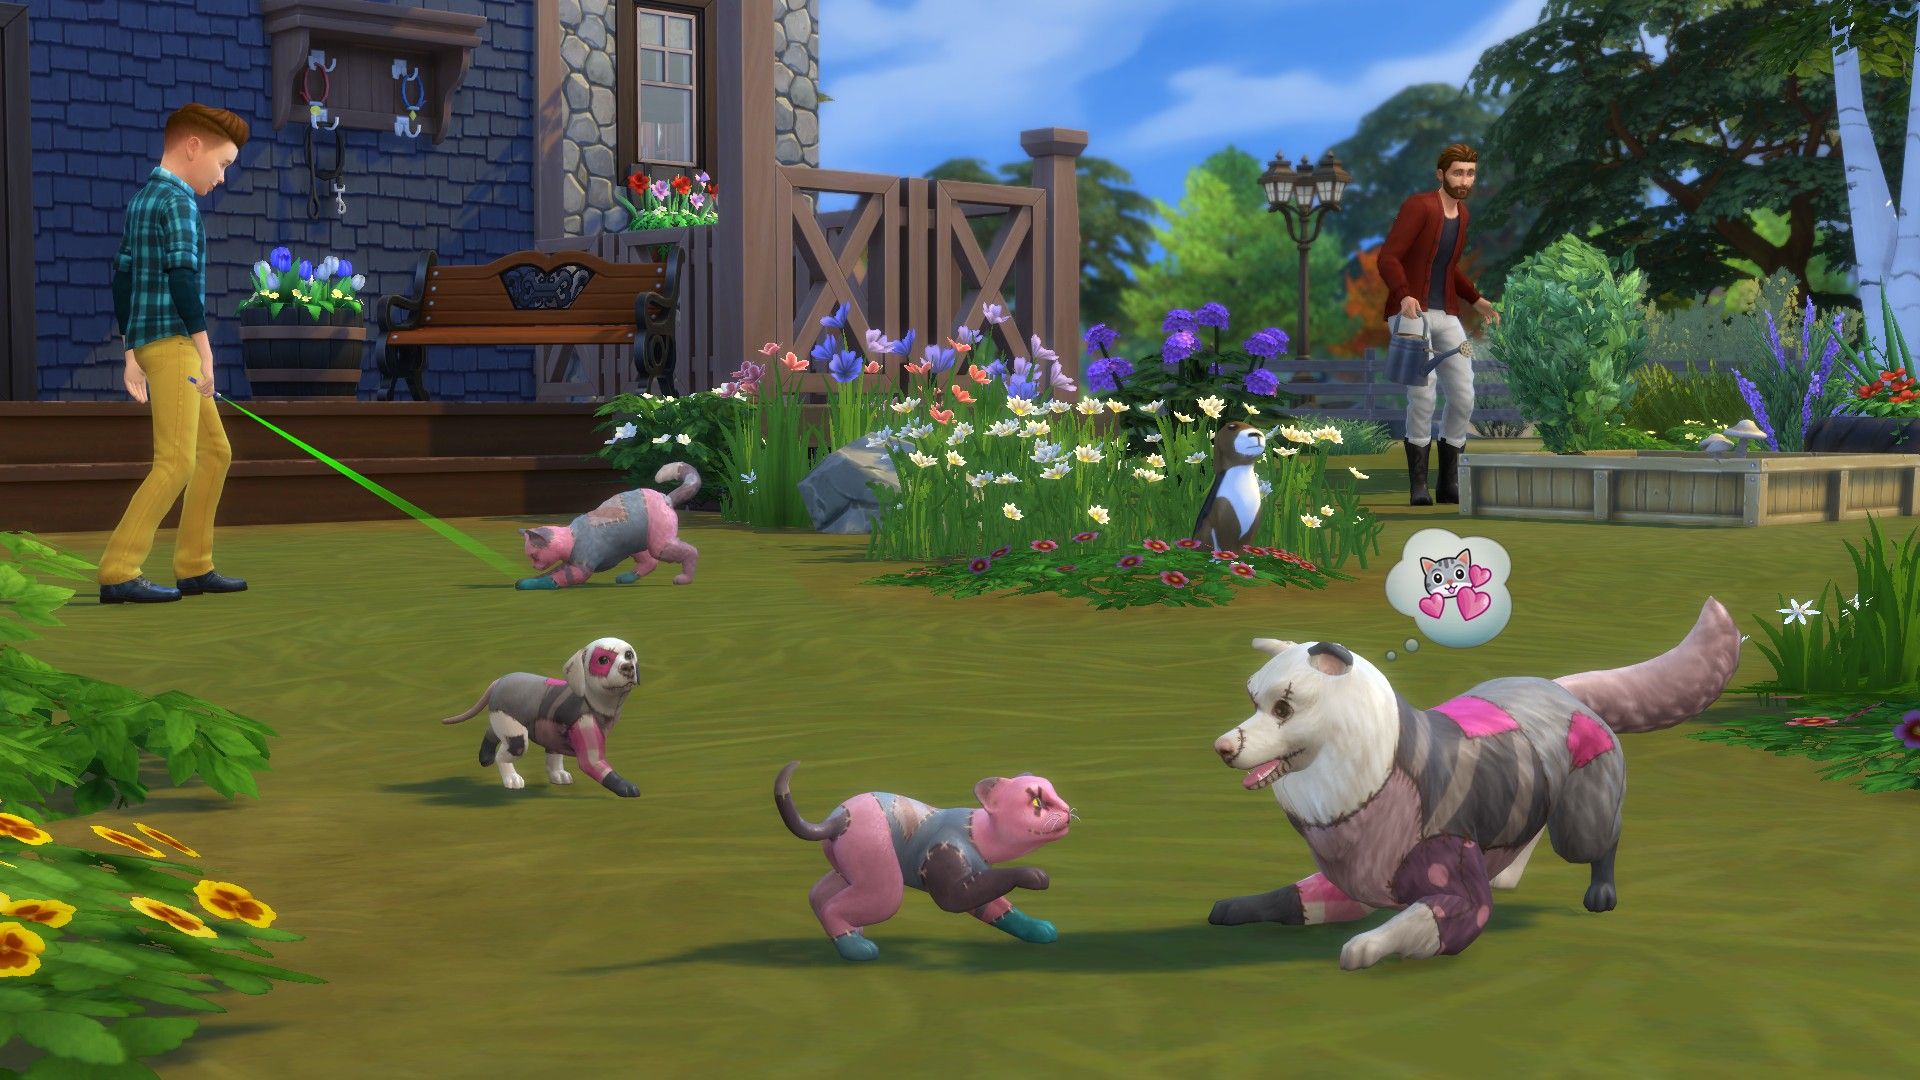 Sims taking their pets for a walk